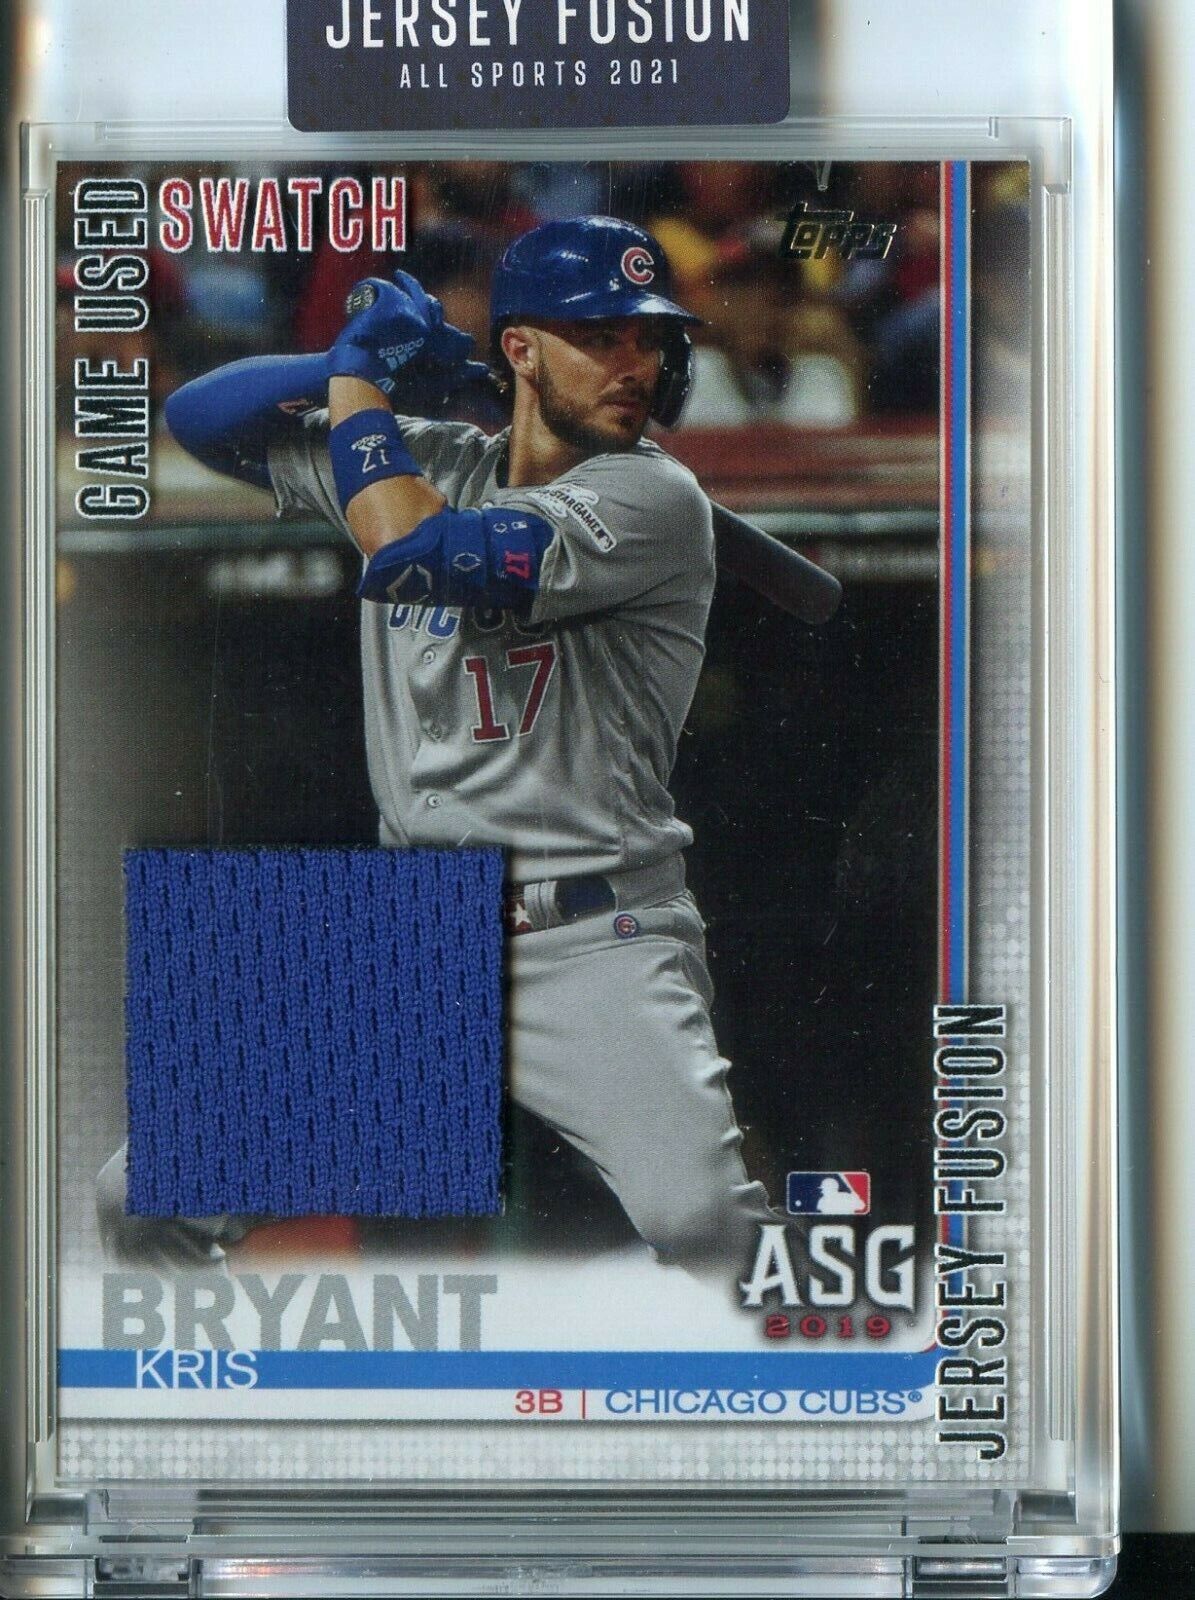 2021 Jersey Fusion Kris Bryant Game Used Jersey Swatch Chicago Cubs